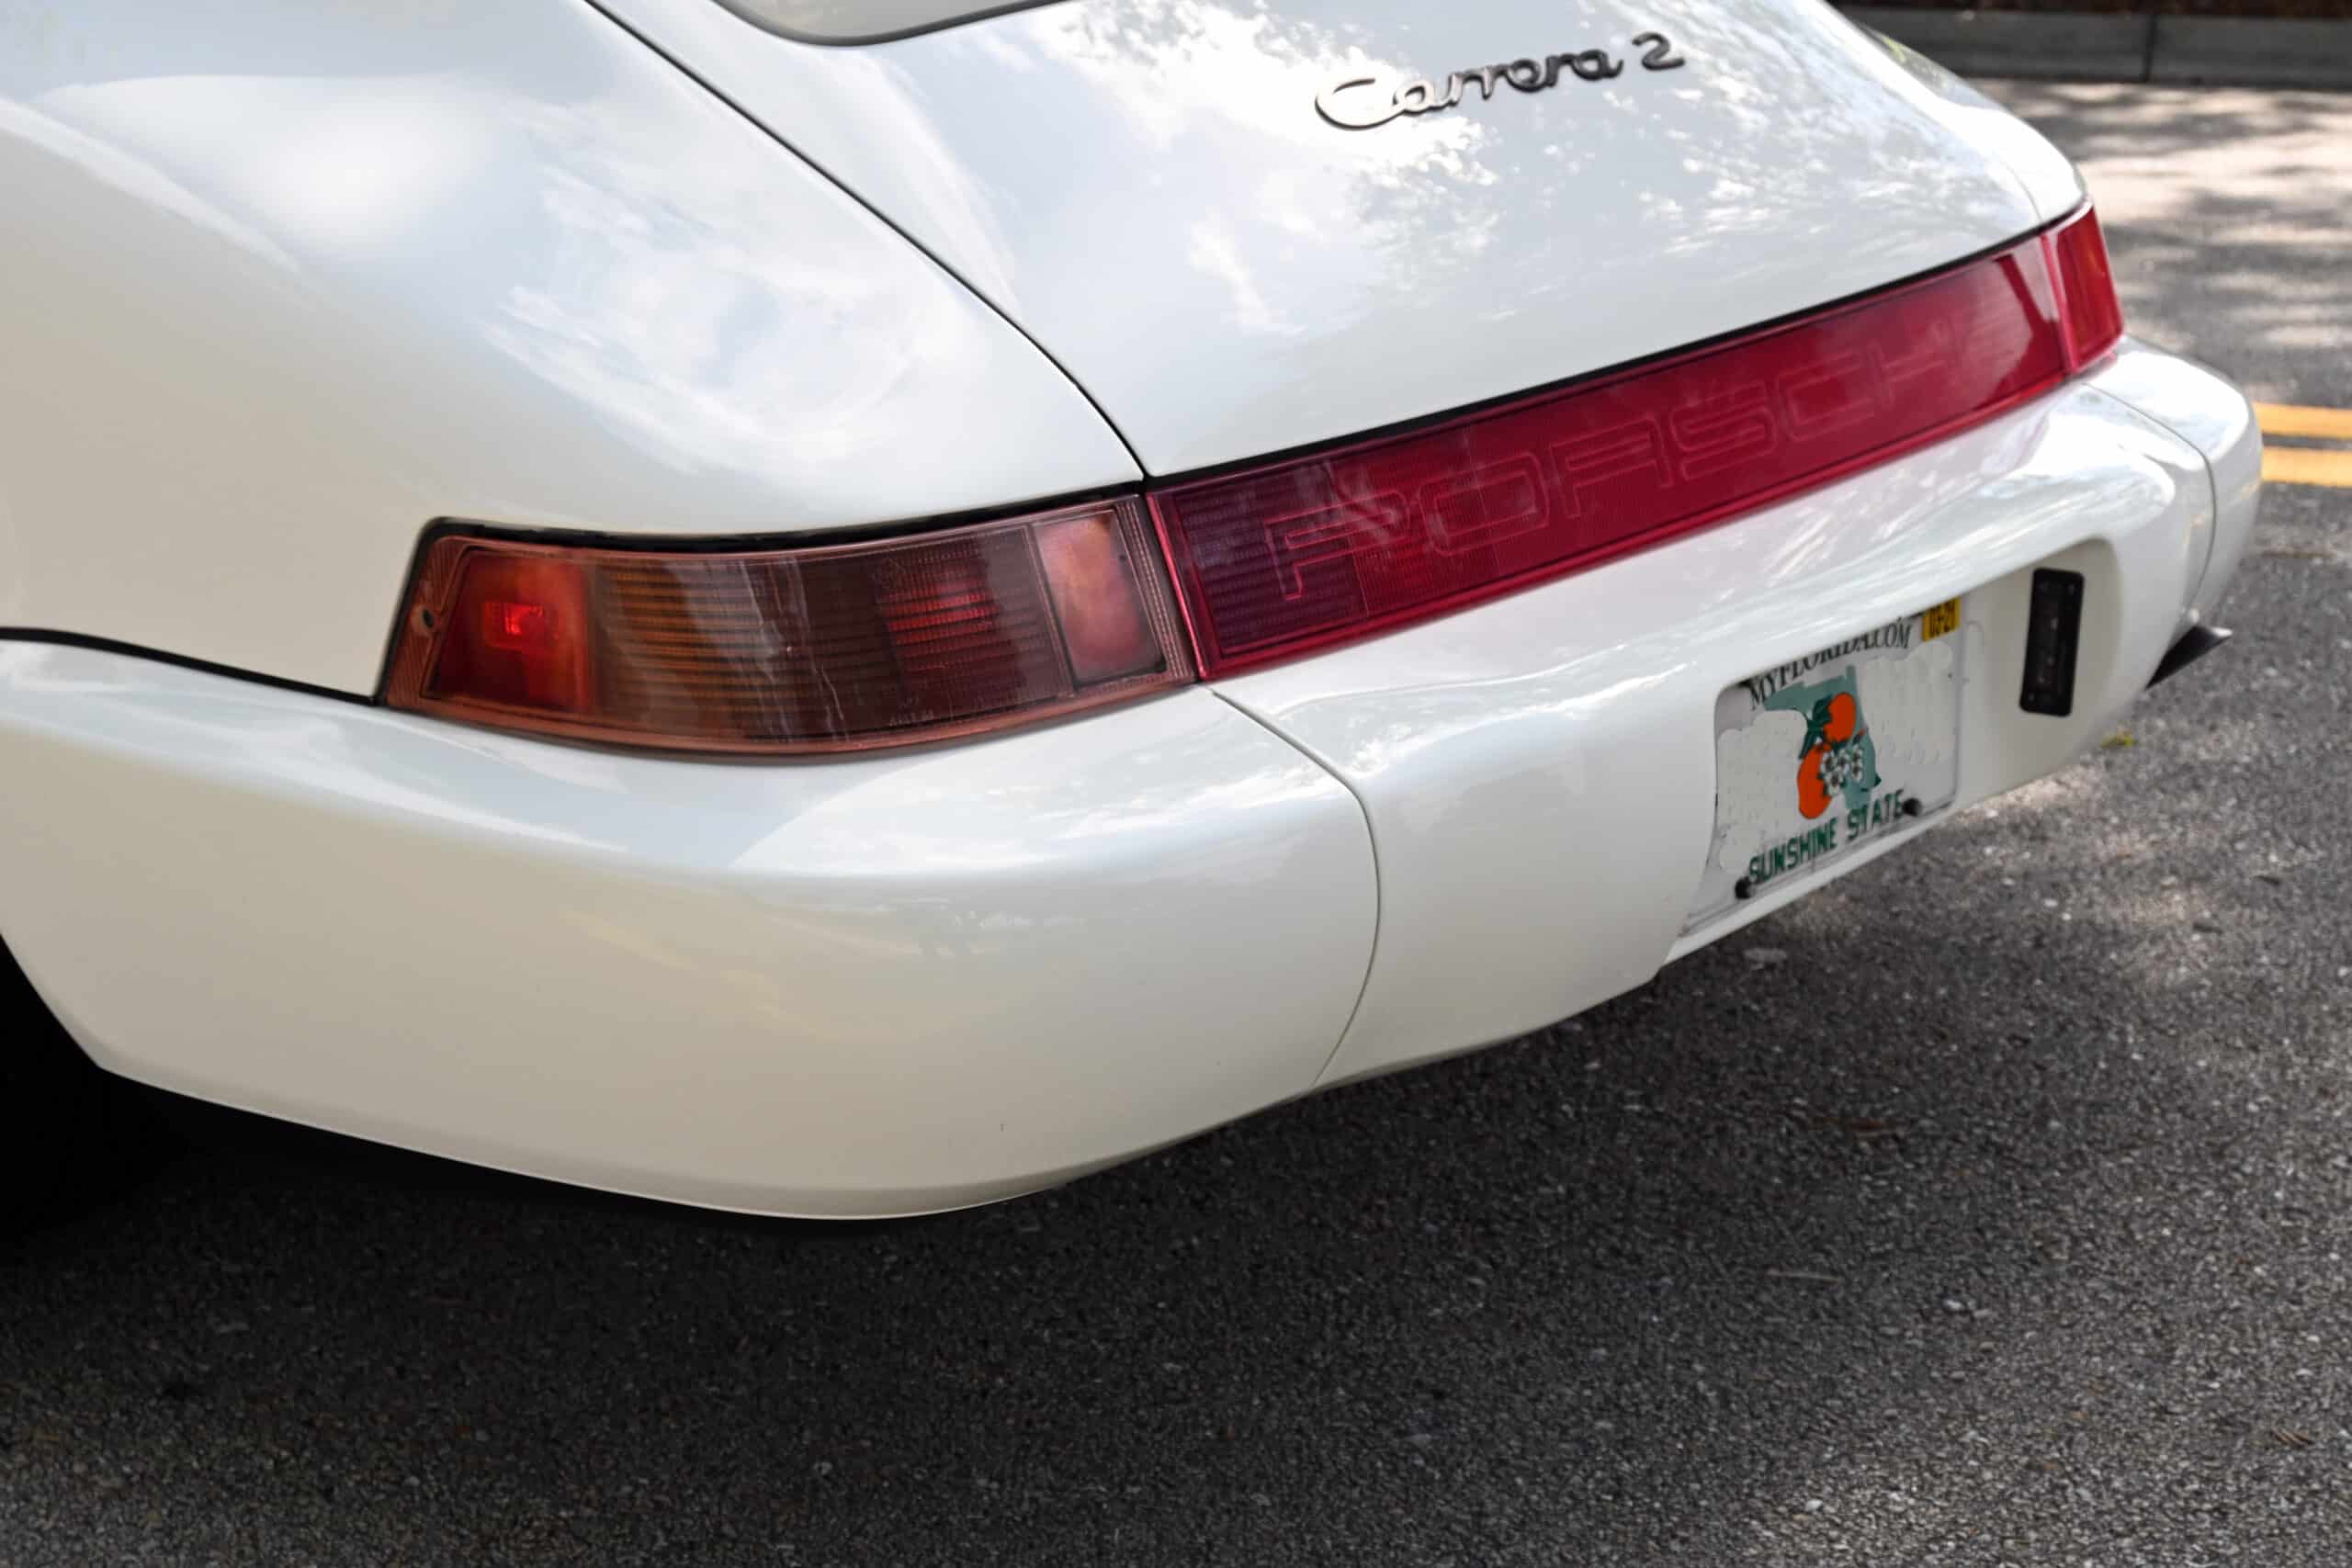 1993 964 Carrera 2.  Last year C2 One of 600, mostly original paint, documented service history